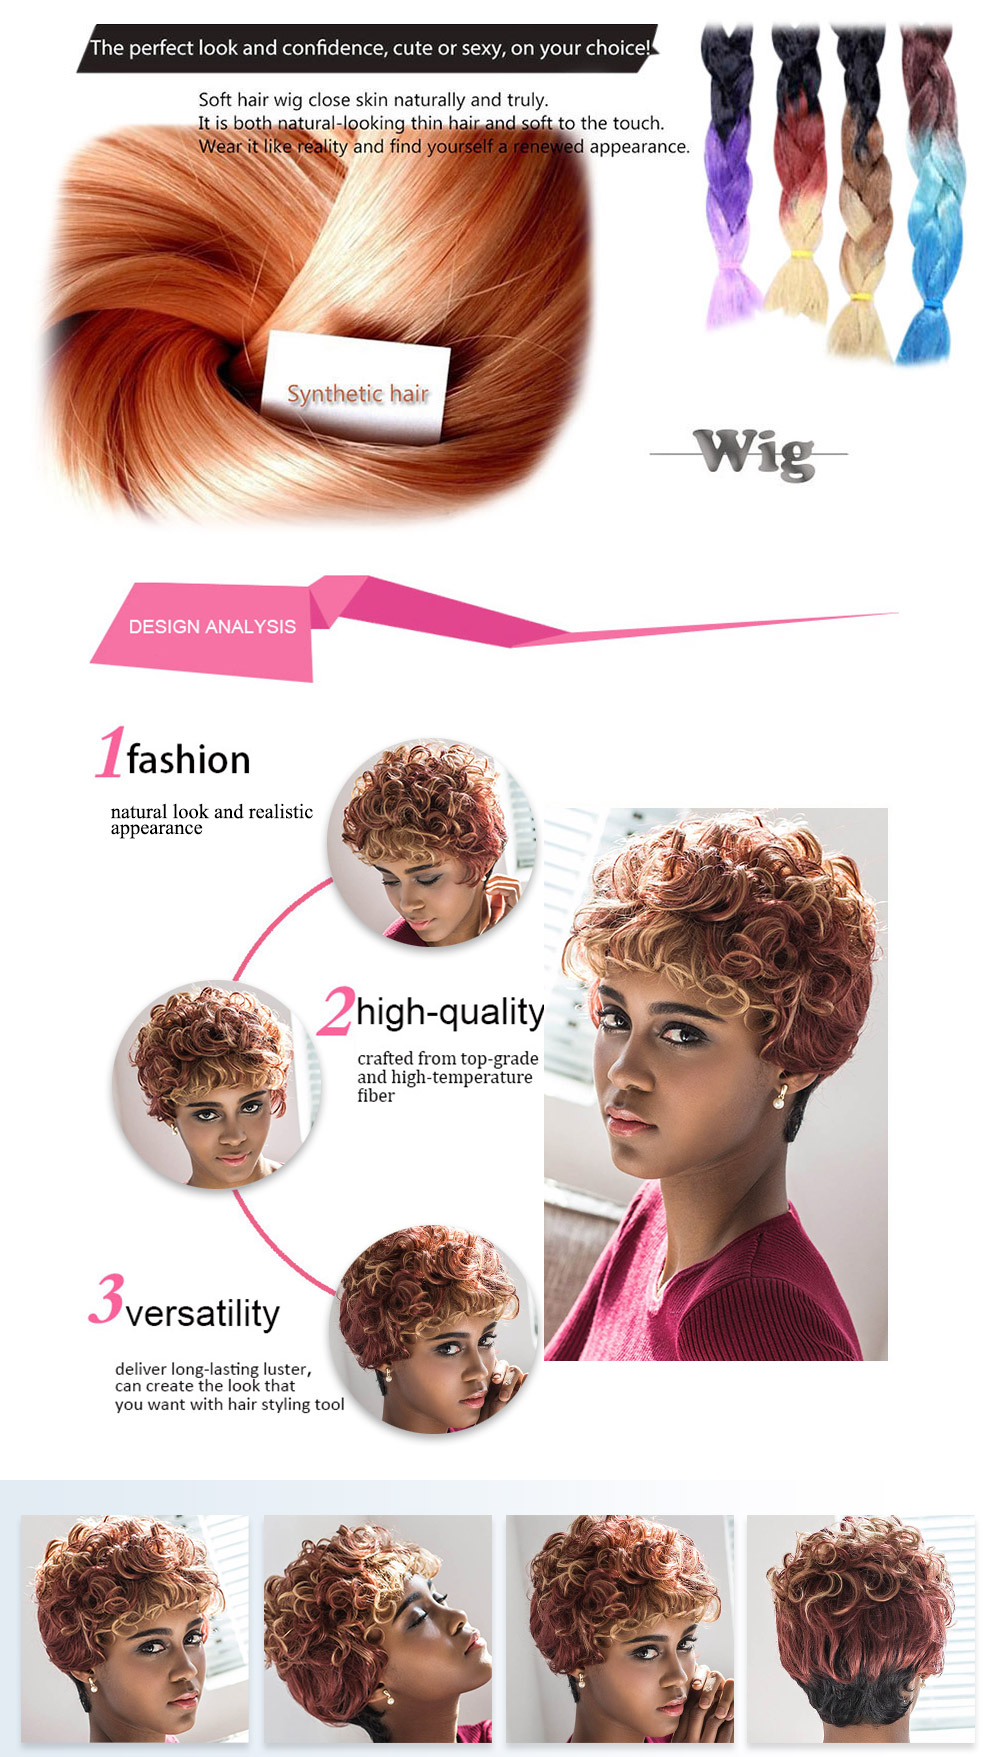 AISIHAIR Stunning Short Round Curly Full Bangs Mixed Color Wigs for Women